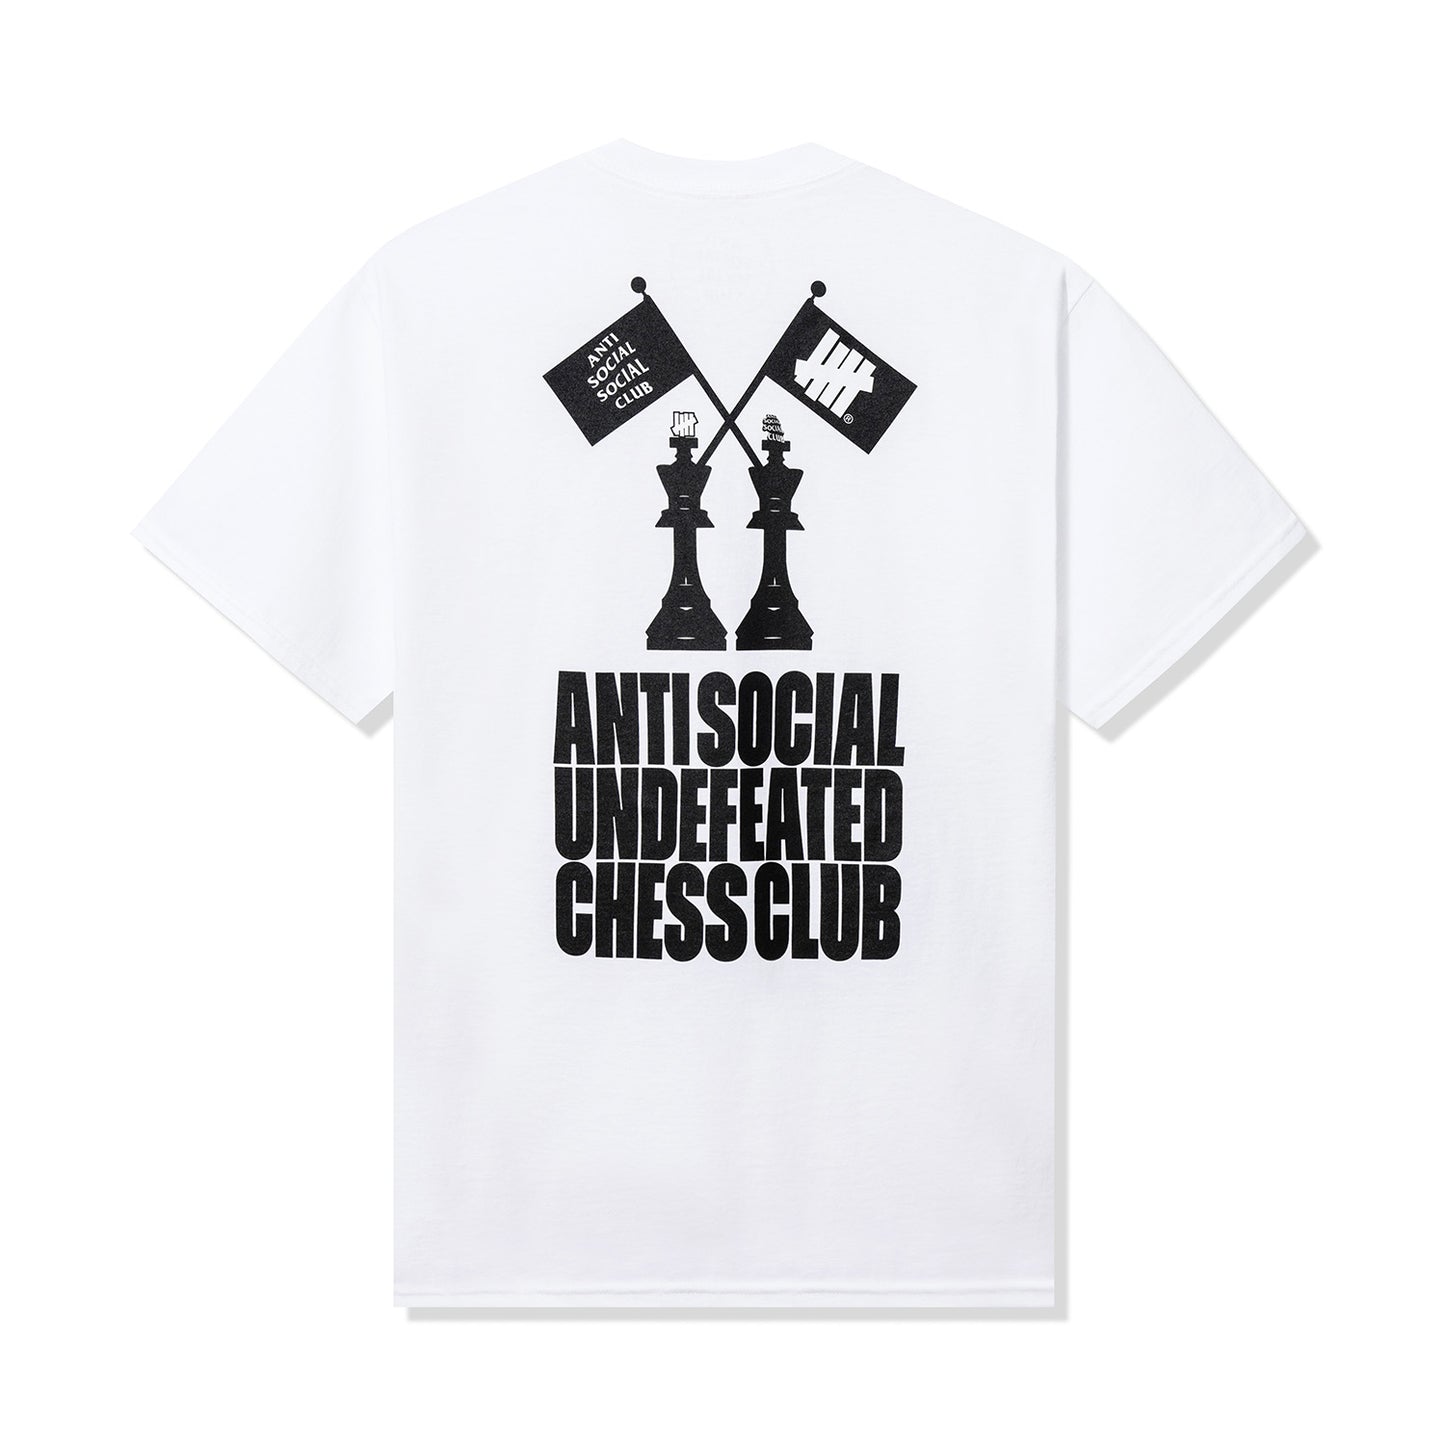 ASSC x Undefeated Chess Club Tee - White